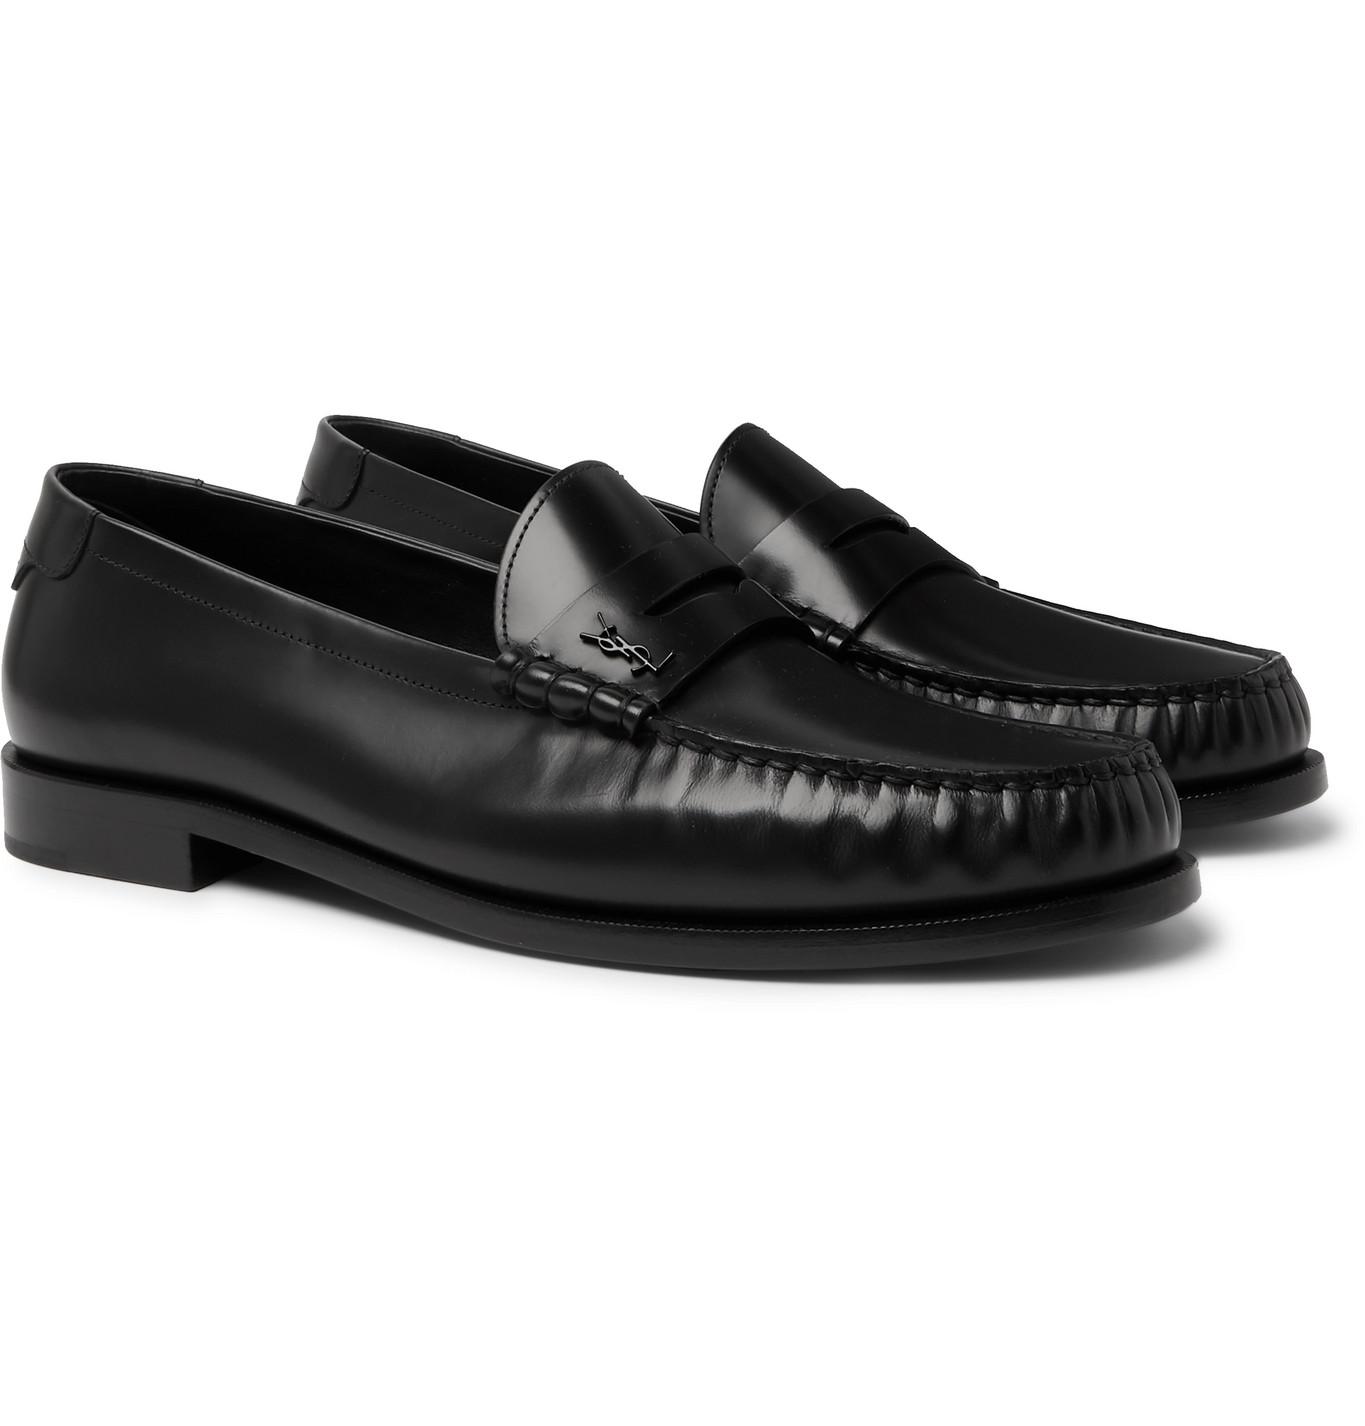 Saint Laurent Leather Loafers in Black for Men - Lyst